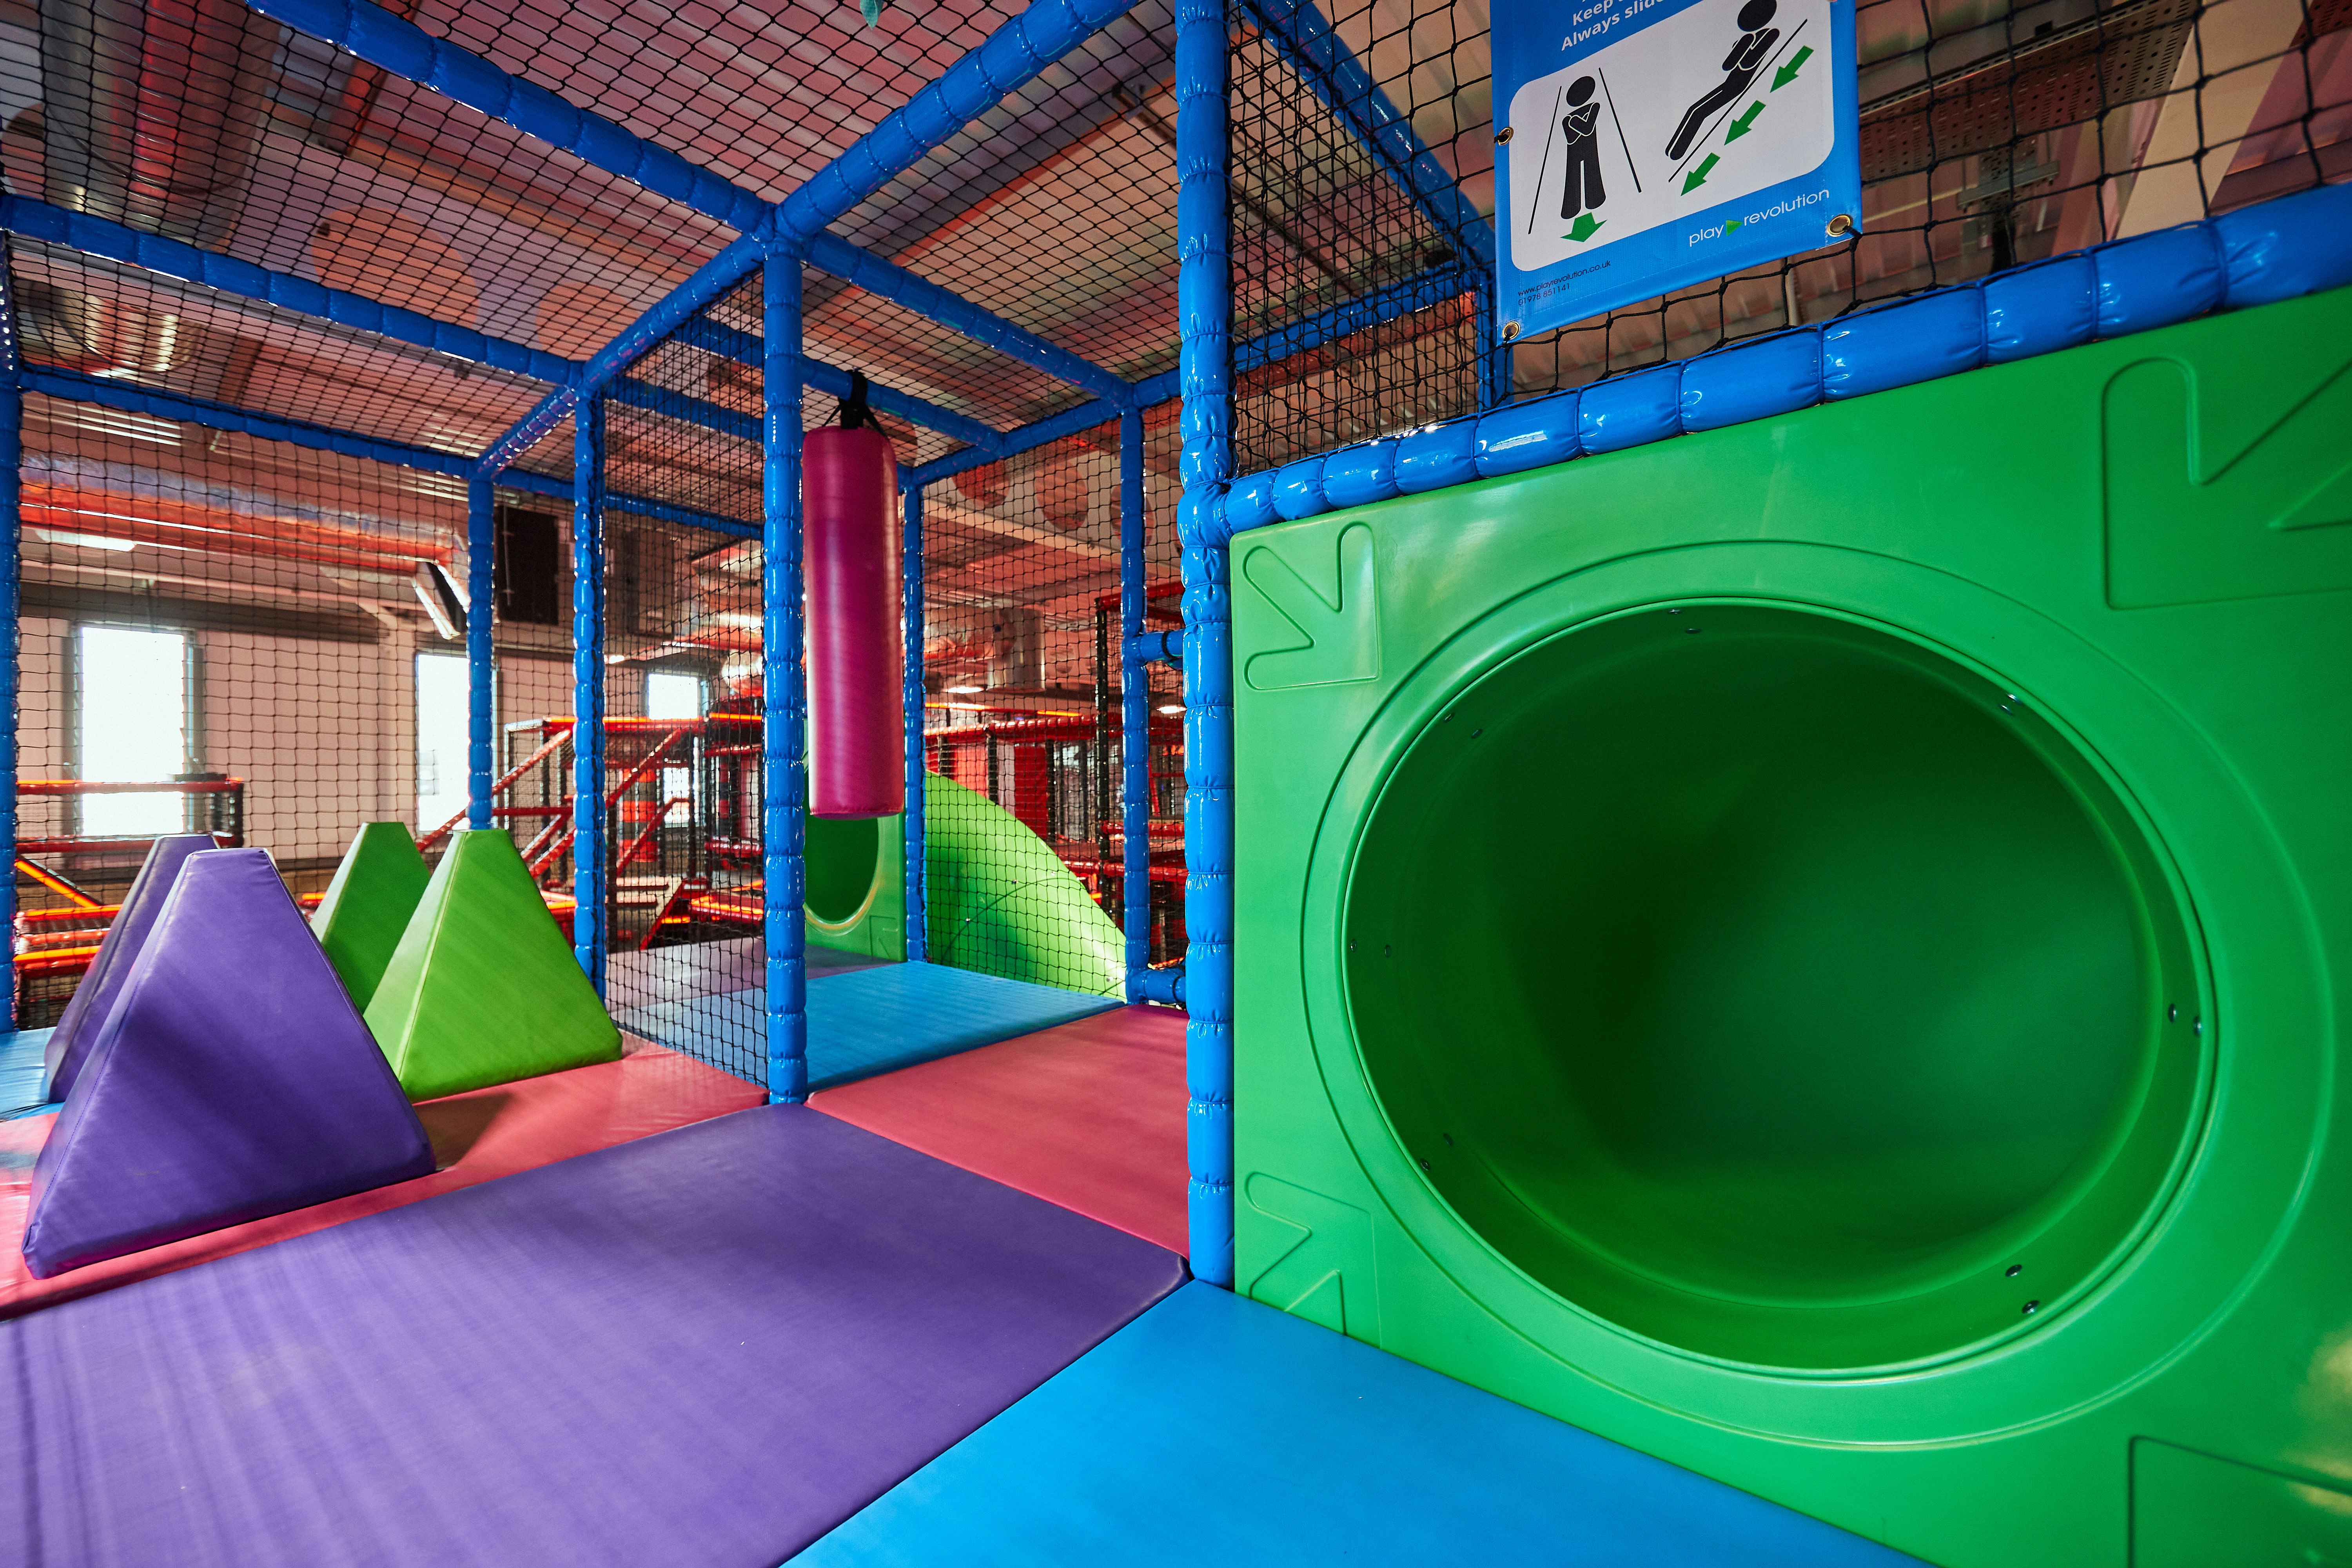 King George's Playing Field & Pavilion - Soft Play  image 1